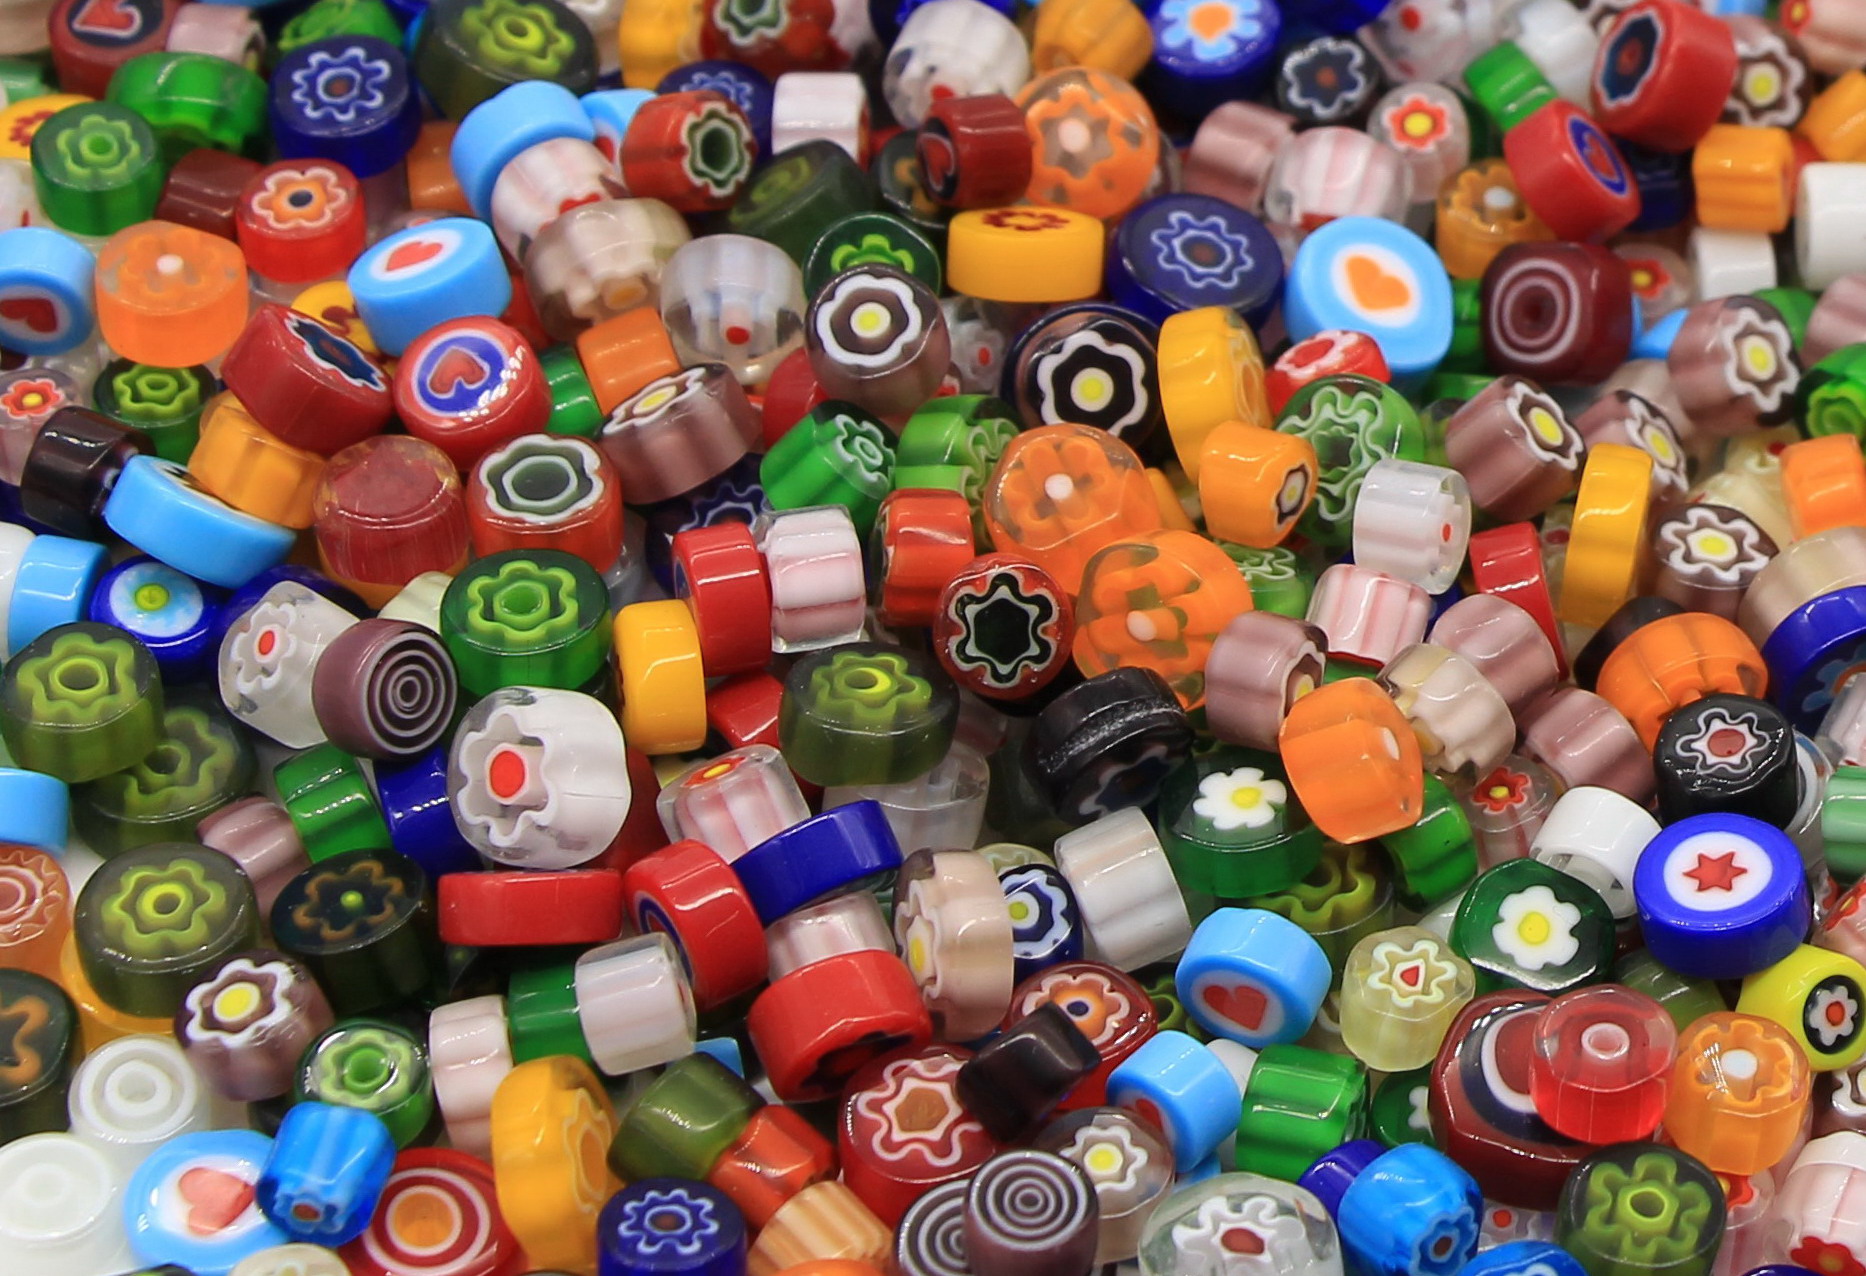 Millefiori Small Glass Beads  for Mosaic Crafts,Mosaic Supplies Mosaic Tiles for Fused Glass Supplies